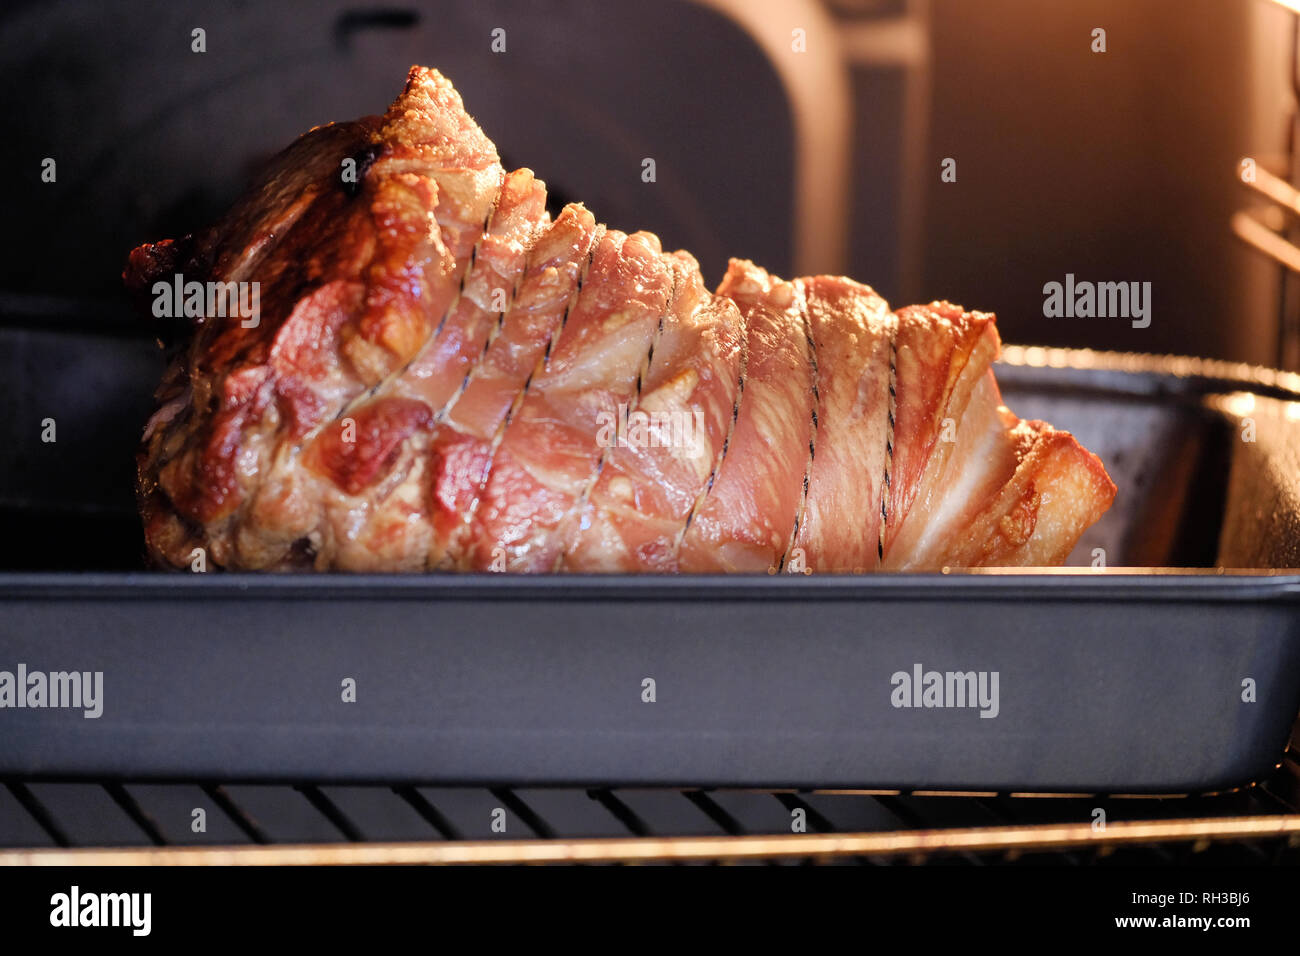 A roast delicious looking shoulder of pork cooking in an oven. The crackling is brown and crunchy  and the joint is held together with string Stock Photo